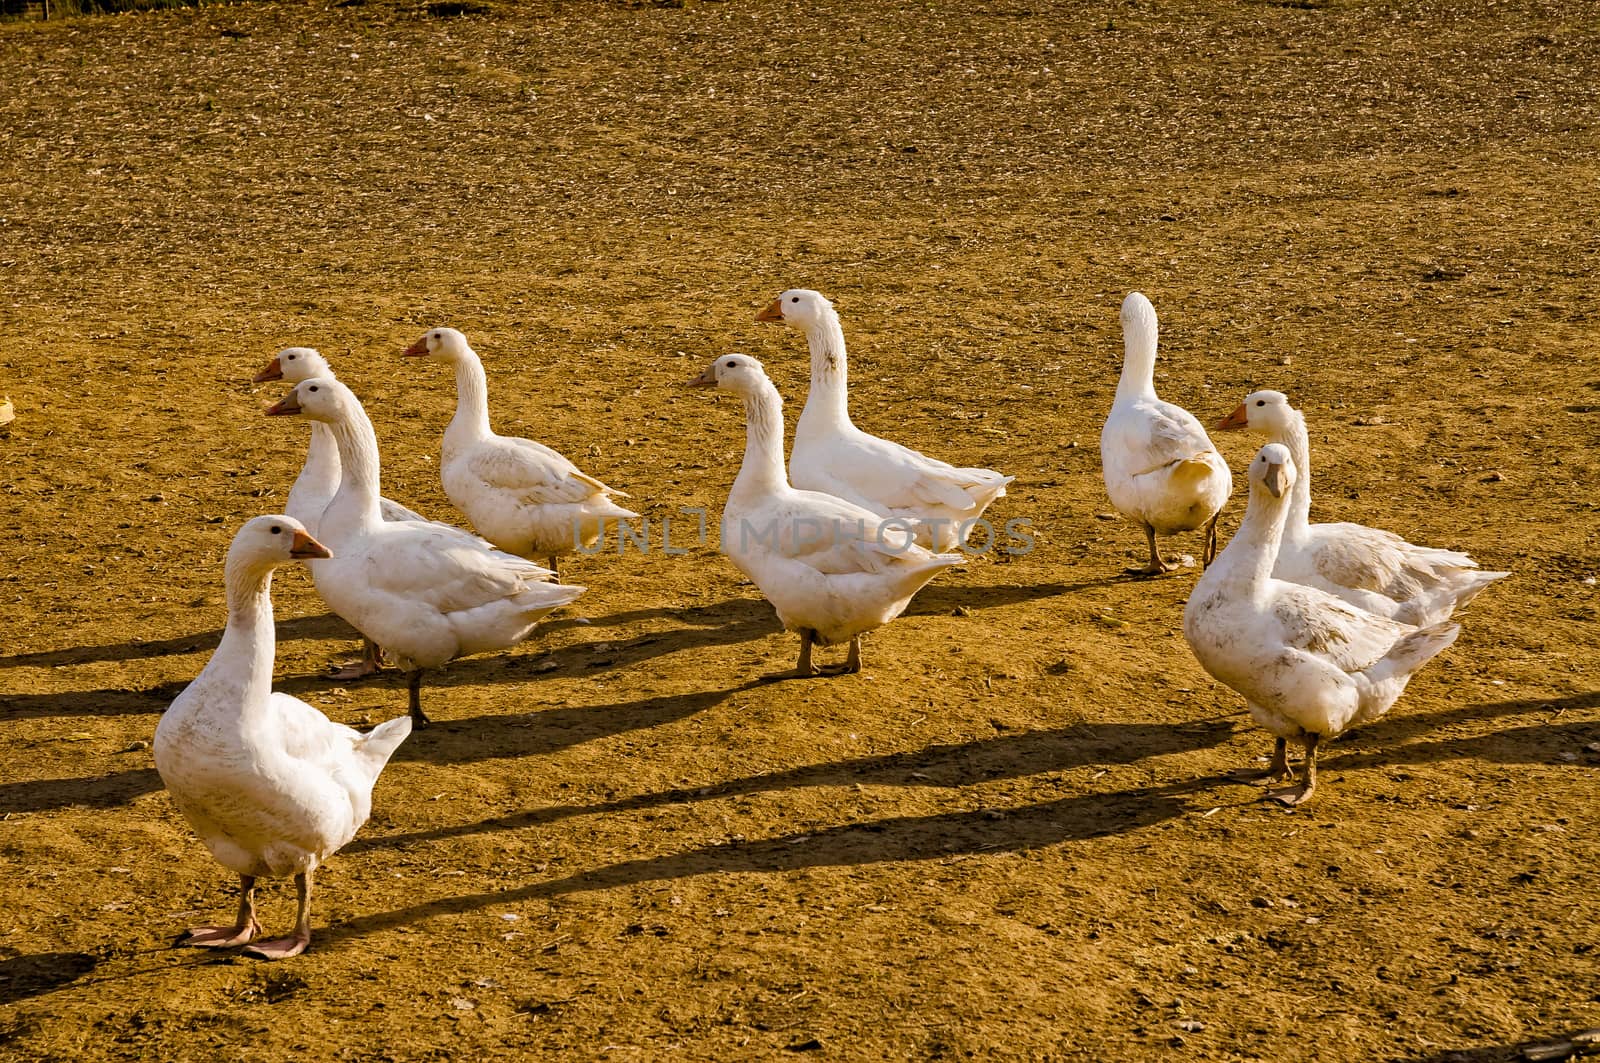 A group of funny Italian geese in the barnyard